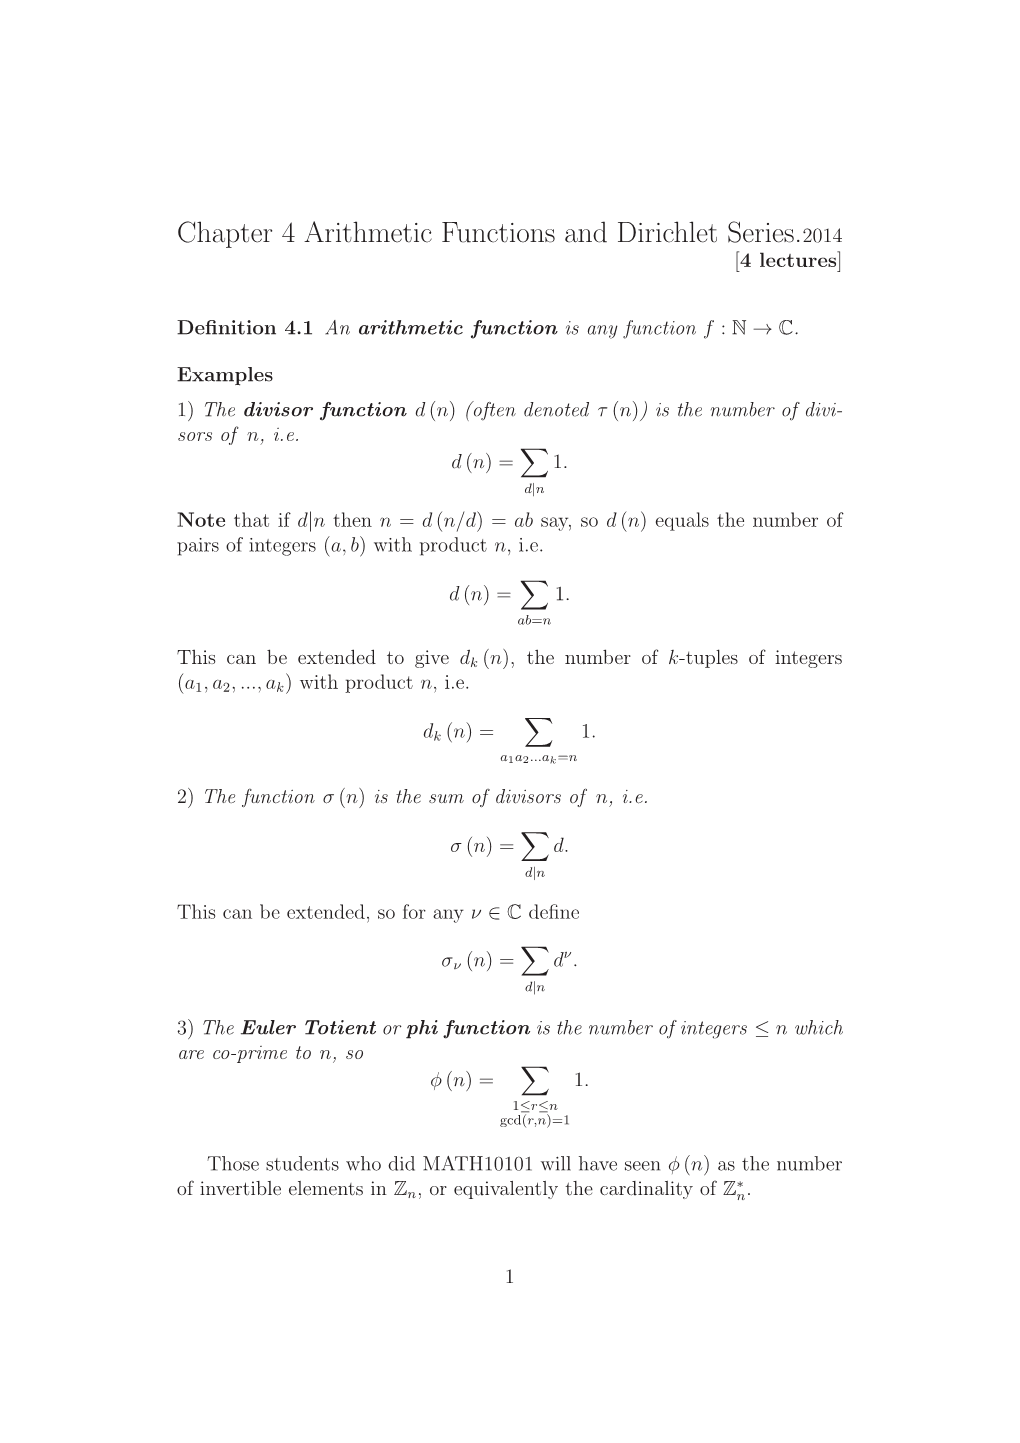 Chapter 4 Arithmetic Functions and Dirichlet Series.2014